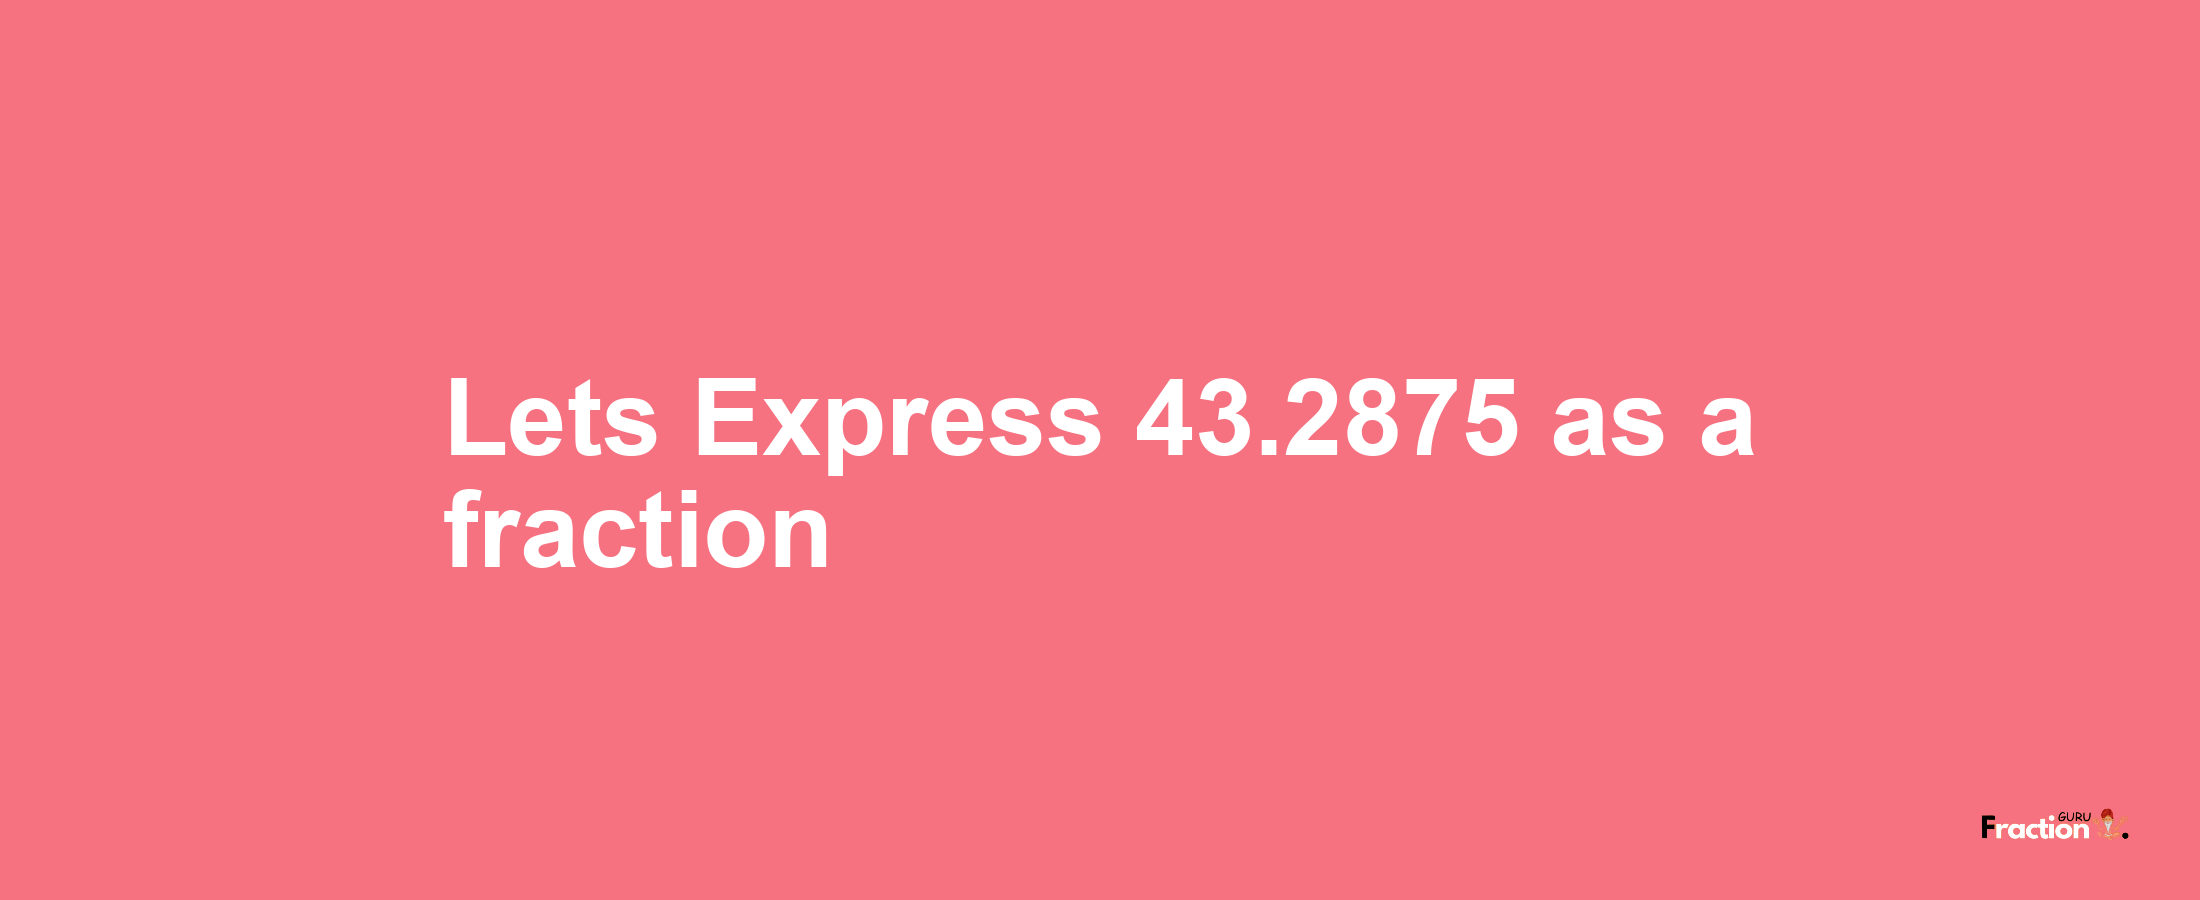 Lets Express 43.2875 as afraction